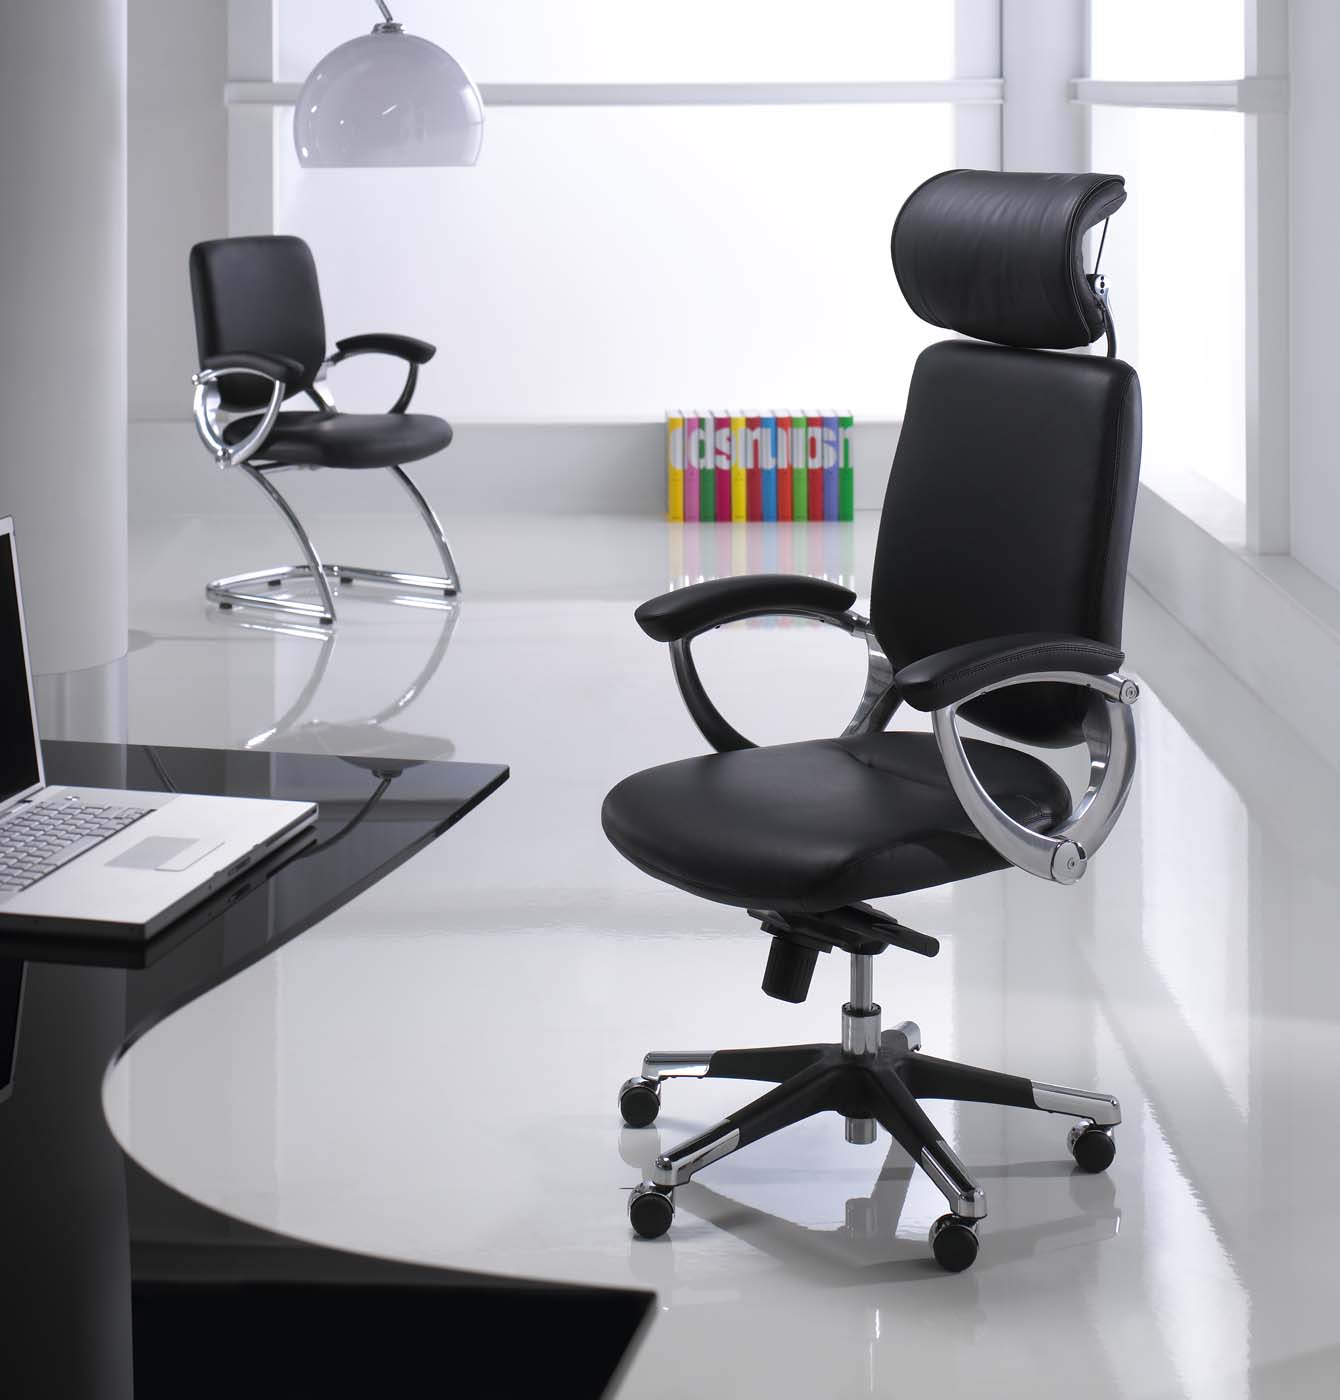 Leather Office Feat Modern Leather Office Chair Design Feat Curved Black Desk And Beautiful Arch Lamp Shade Idea Office  Futuristic Chairs That Will Improve The Interior Designs Of Your Offices 